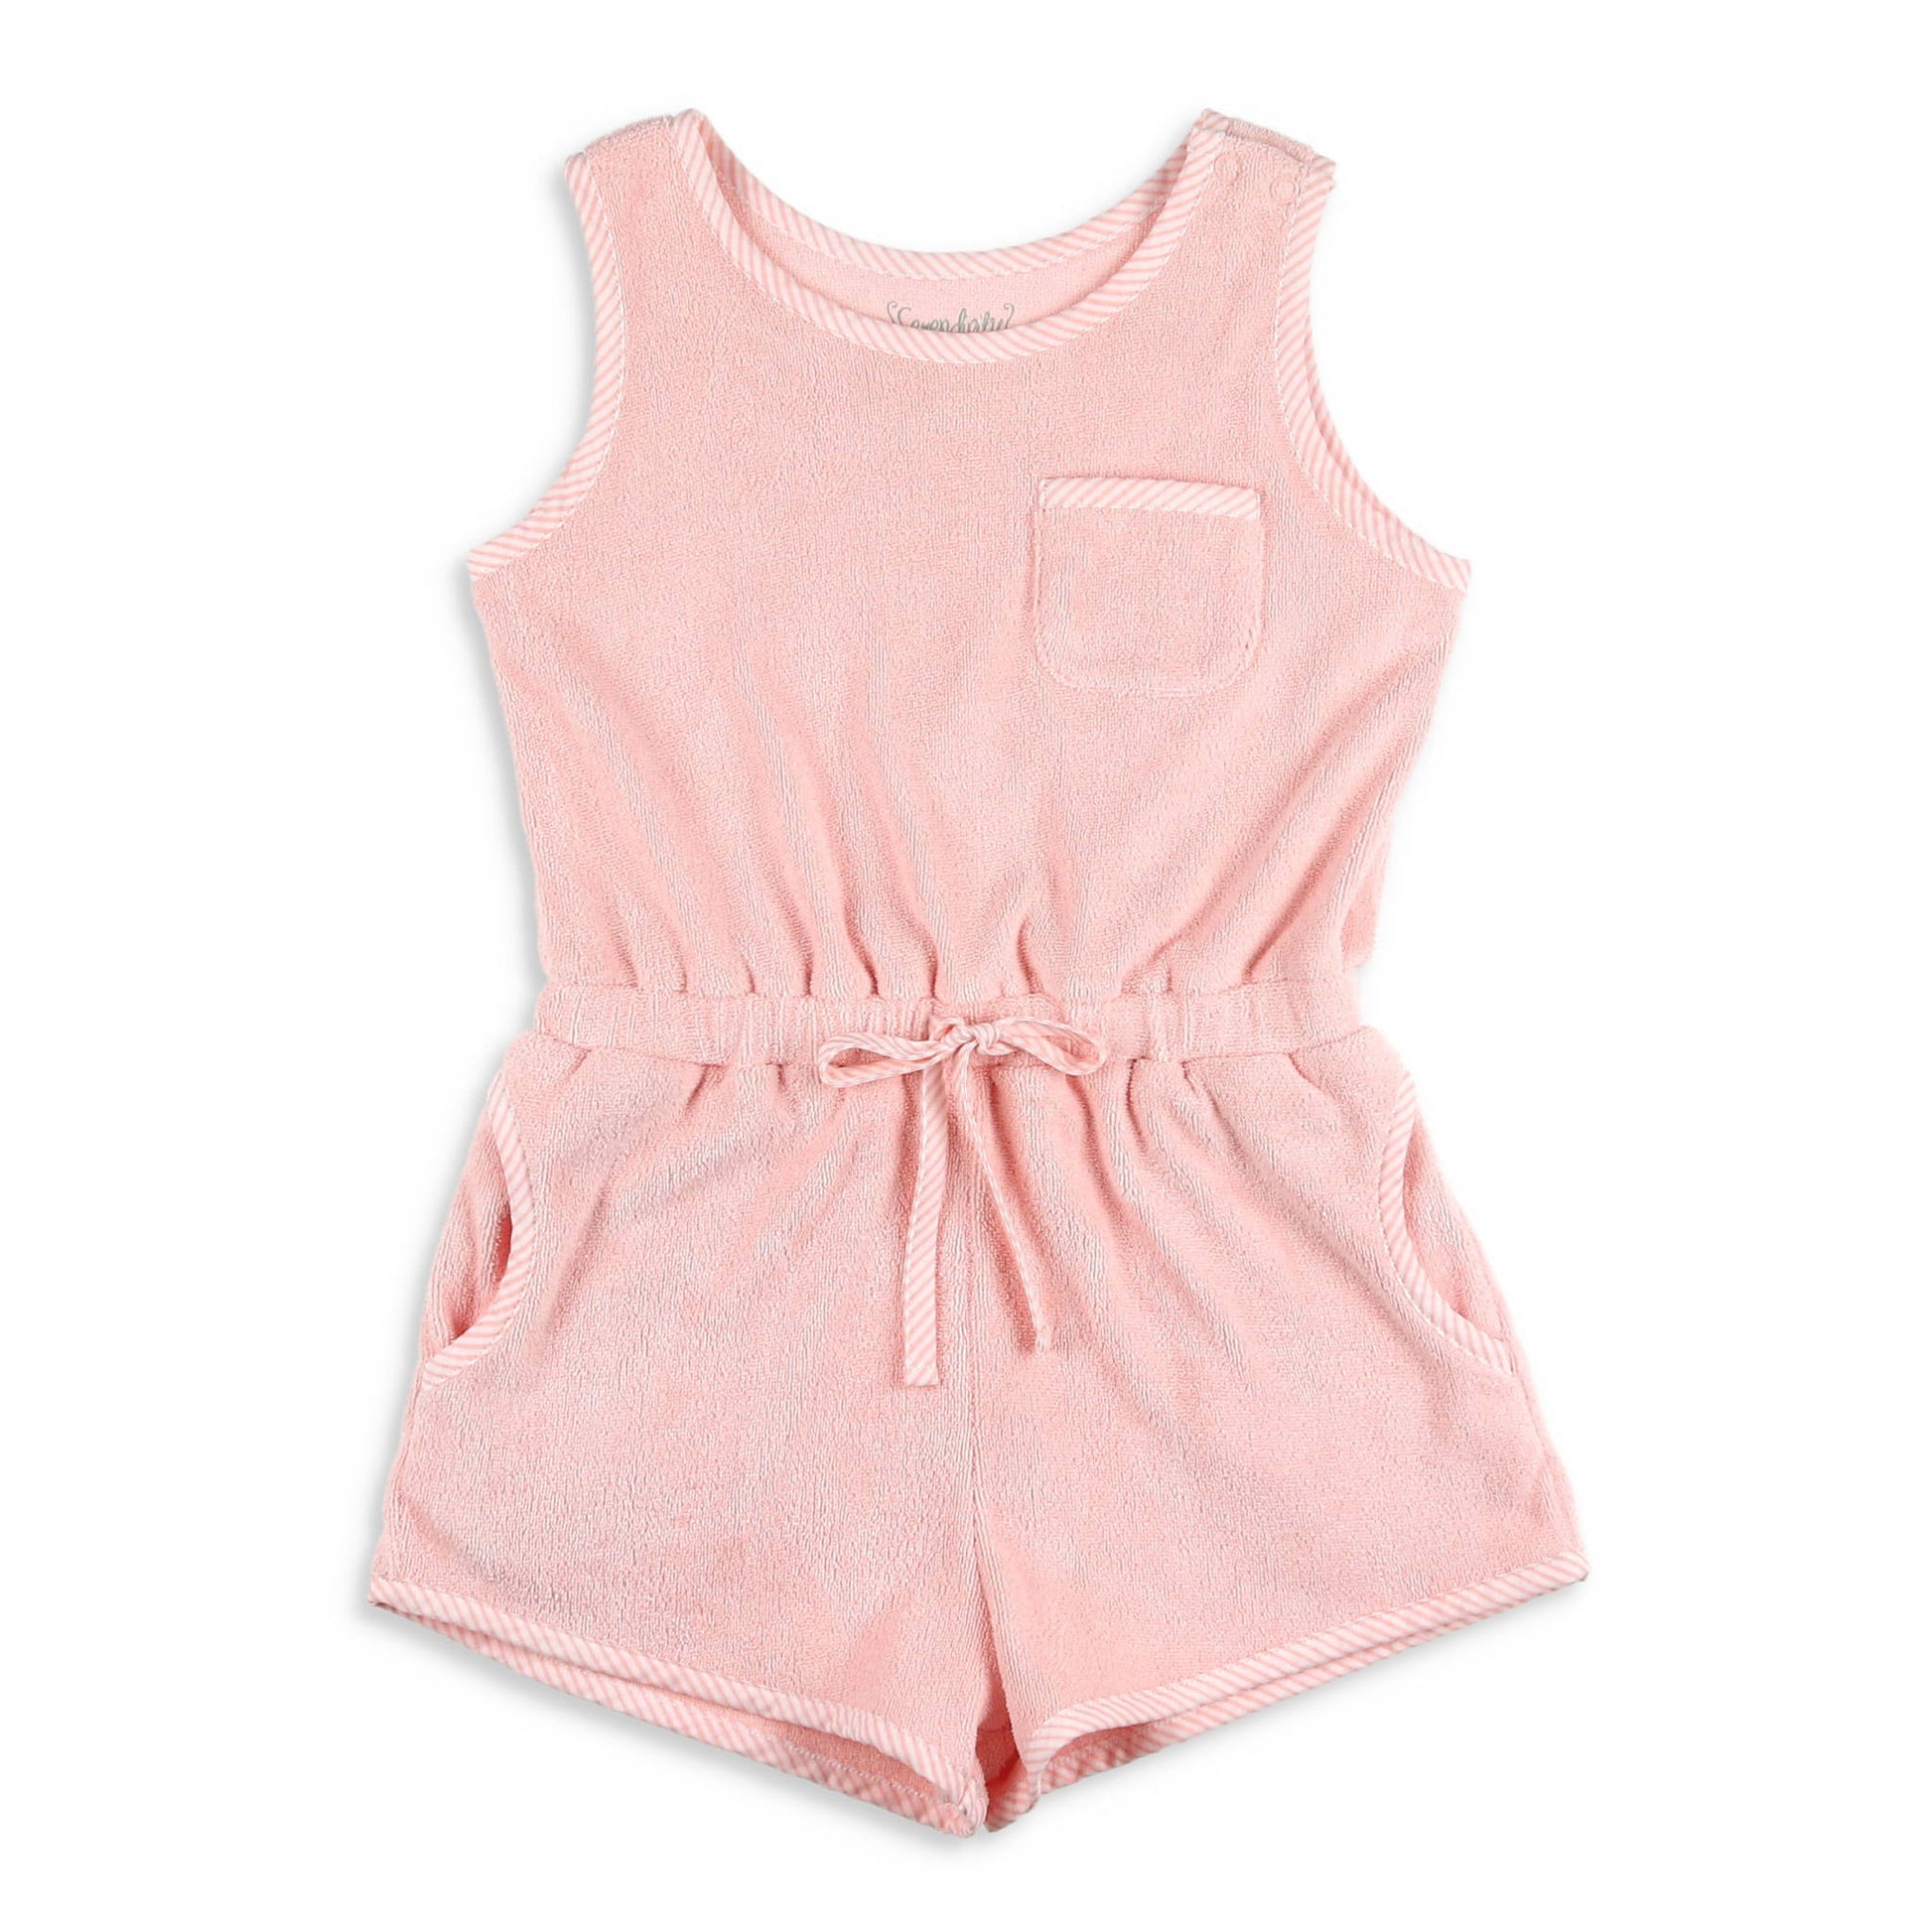 Girls Pink Terry Romper - Shrimp and Grits Kids